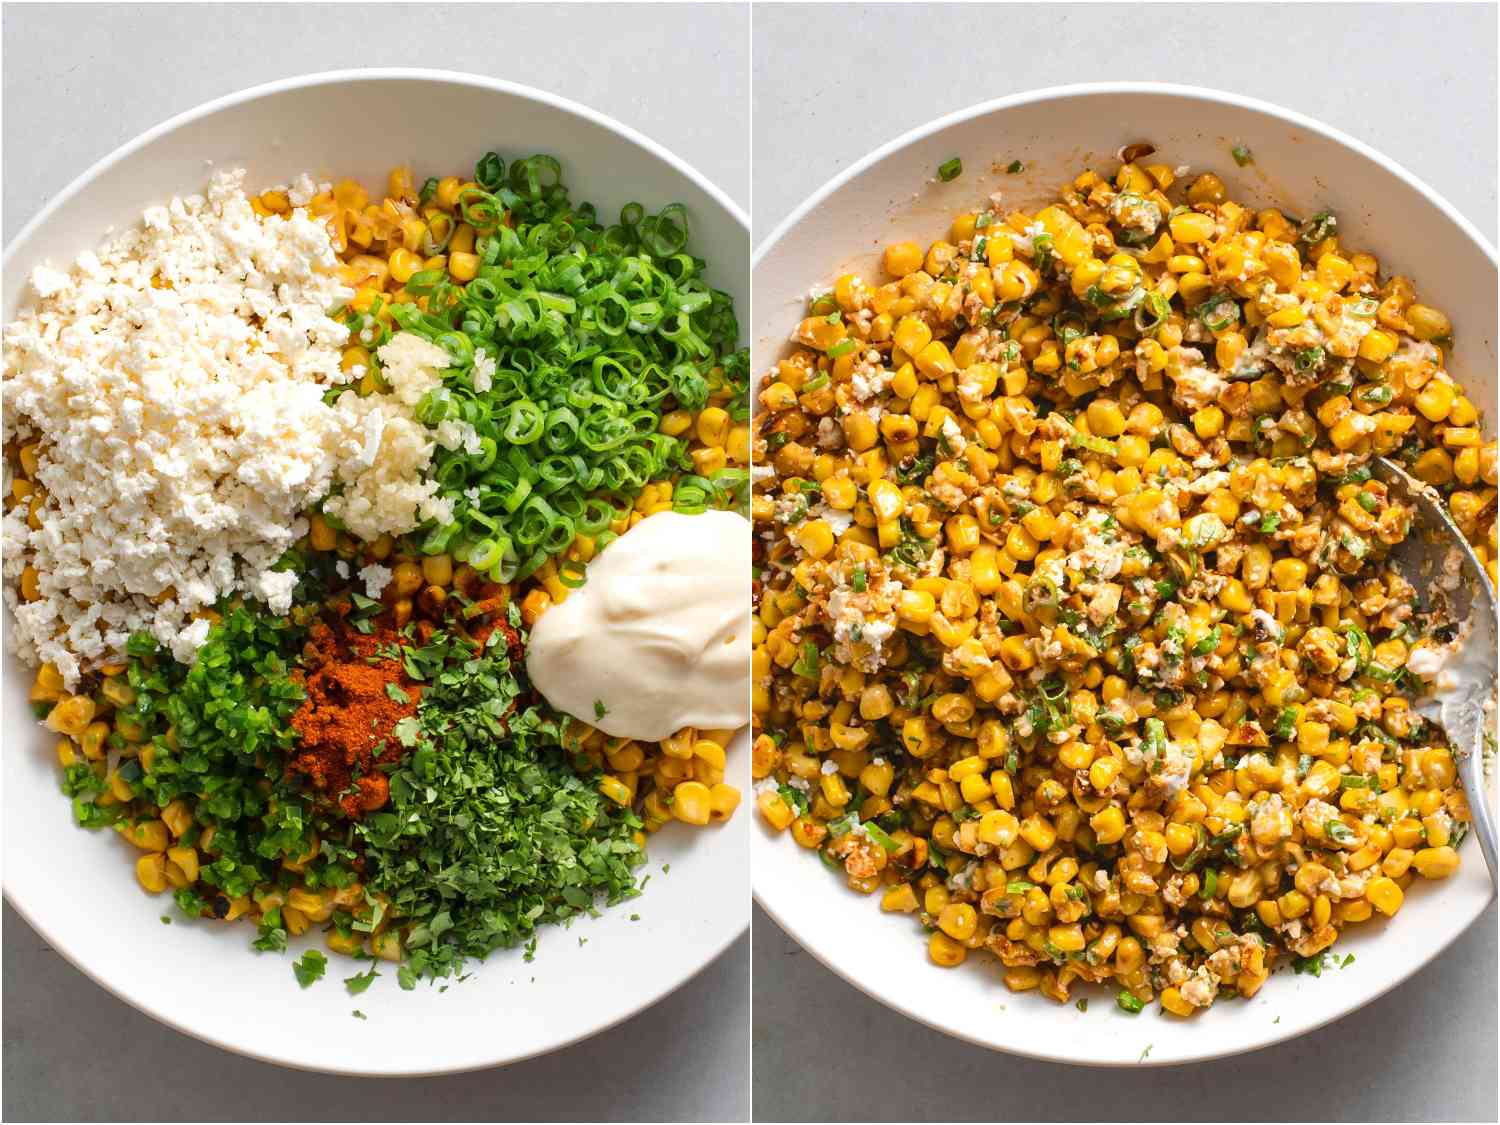 A two-image collage of the esquites before all of the ingredients are mixed in. The left image shows the ingredients on top of the charred corn, and the right image shows the dish completely mixed together.